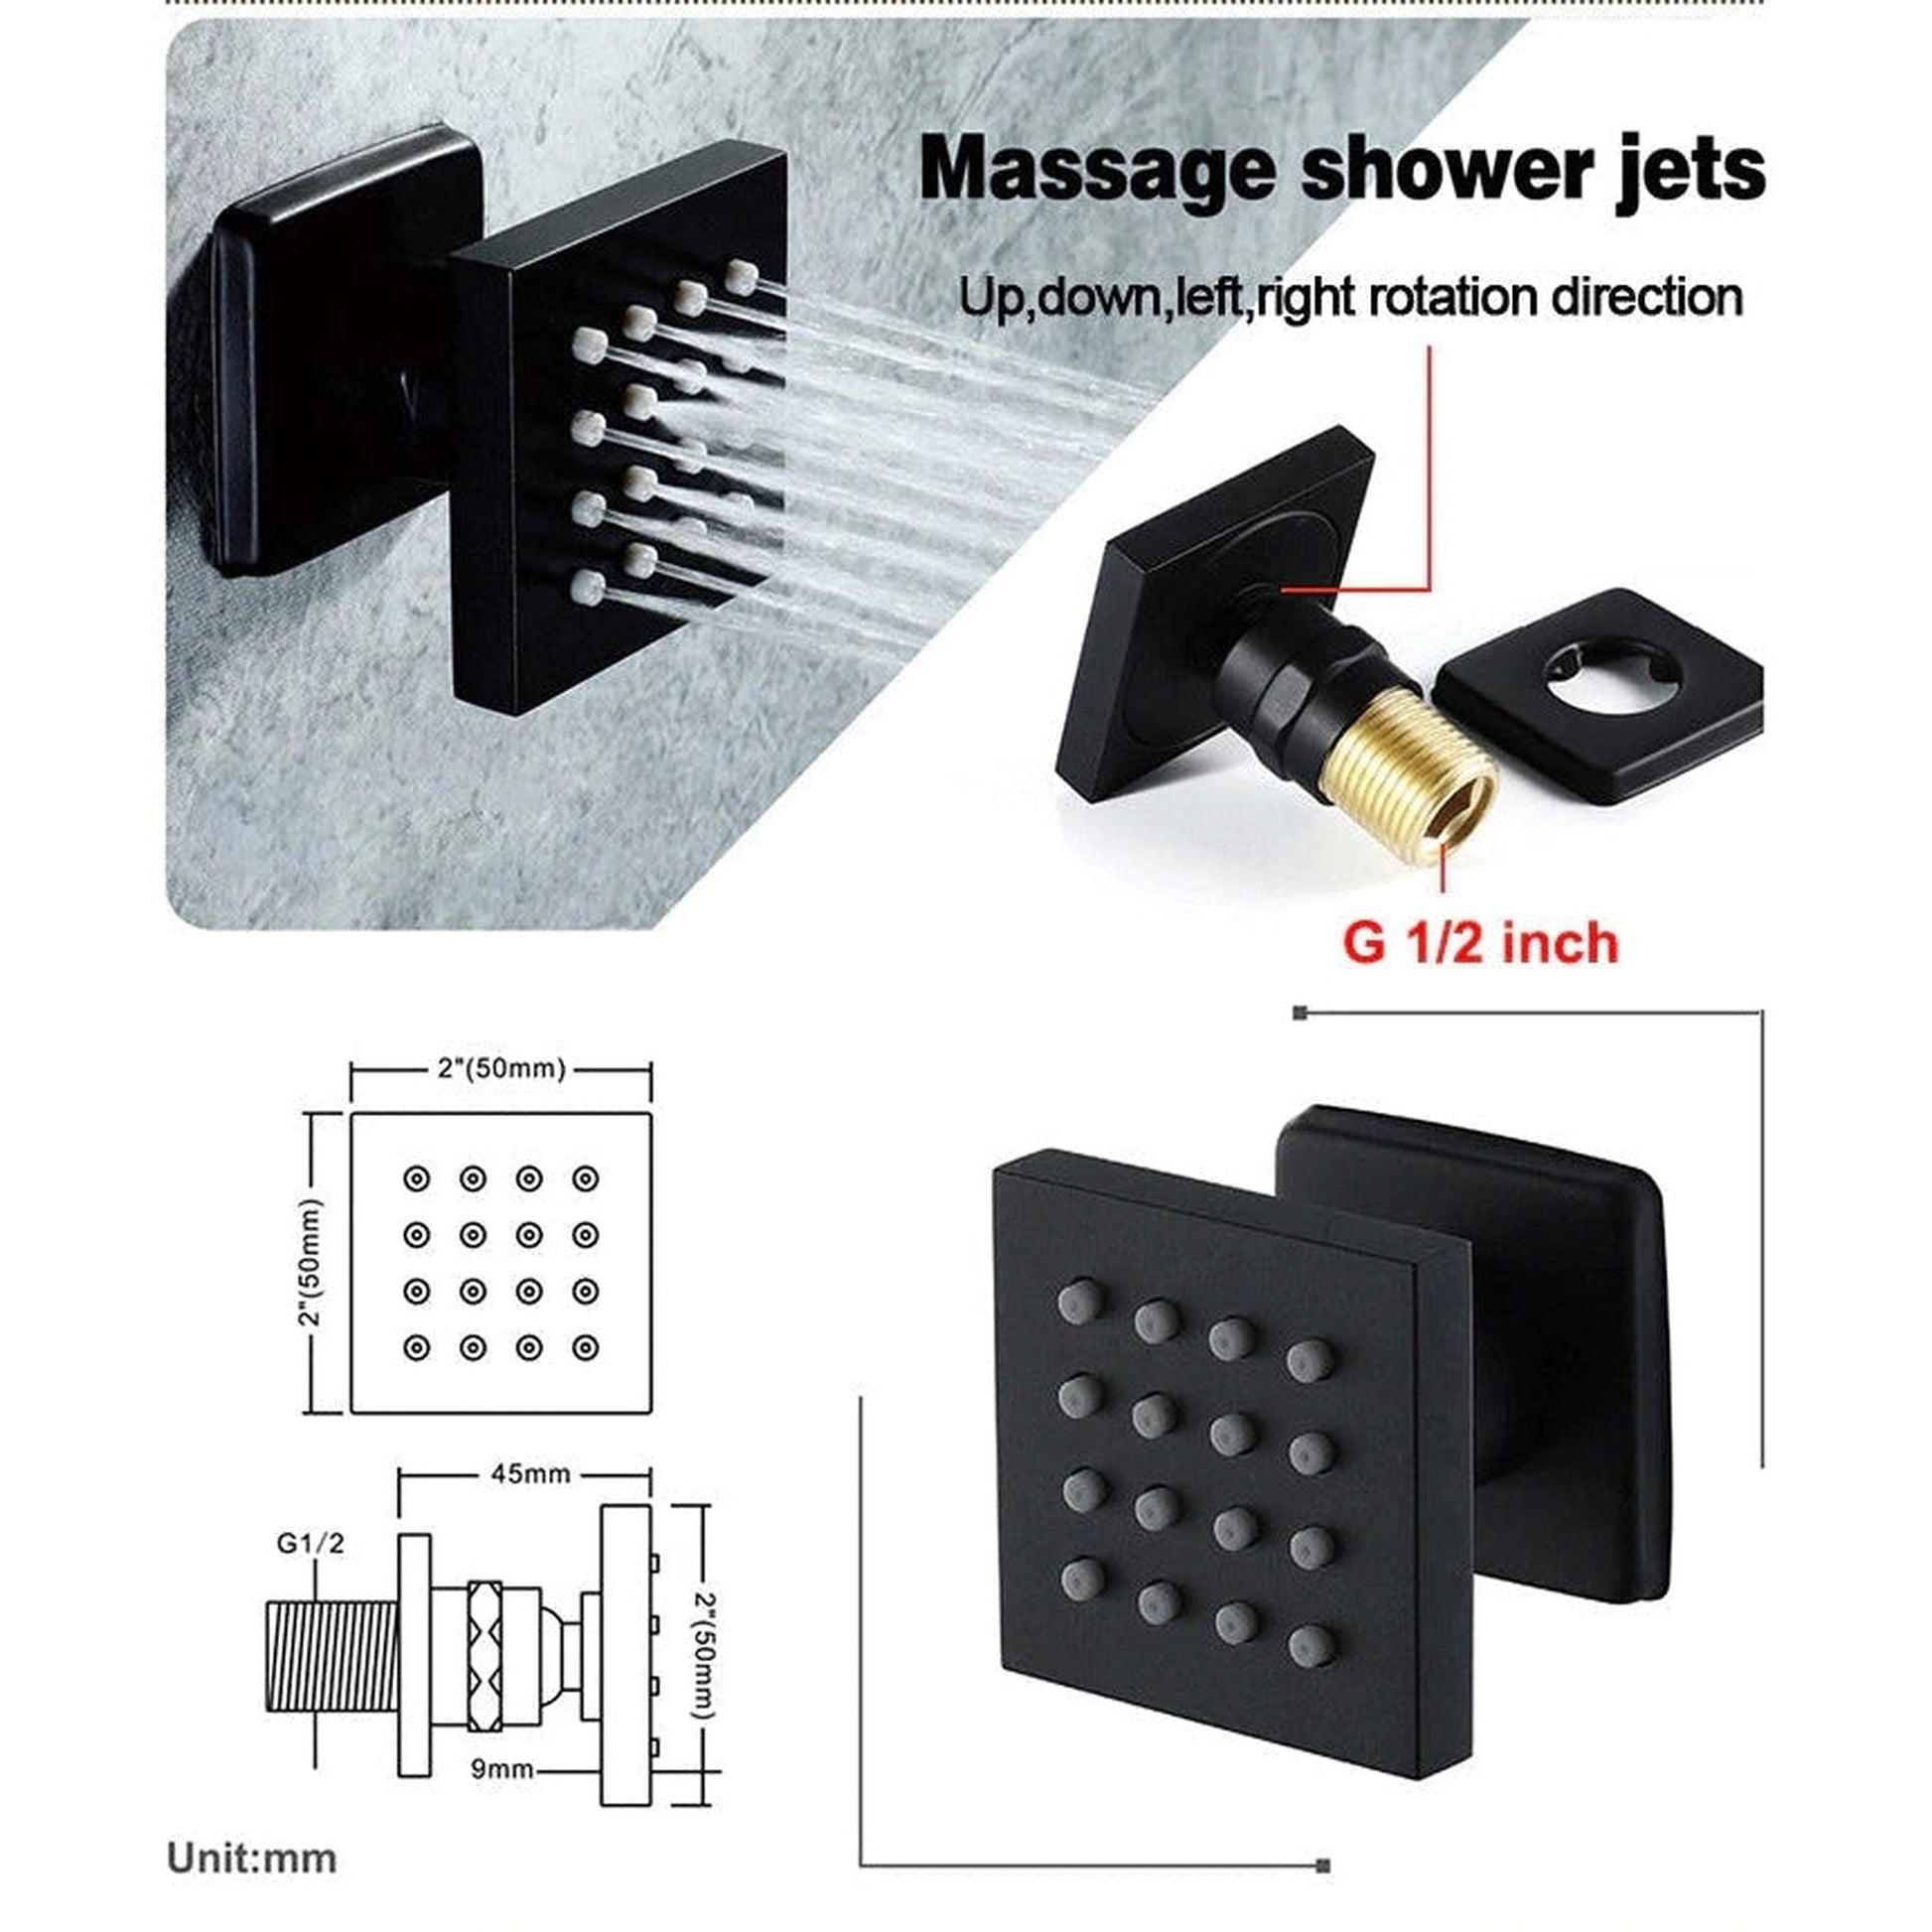 FontanaShowers Verona Creative Luxury Matte Black Rectangular Ceiling Mounted Thermostatic Bluetooth Musical Smart LED Rain Shower System With 6-Jet Massage Sprays and Touch Panel Controlled Hand Shower